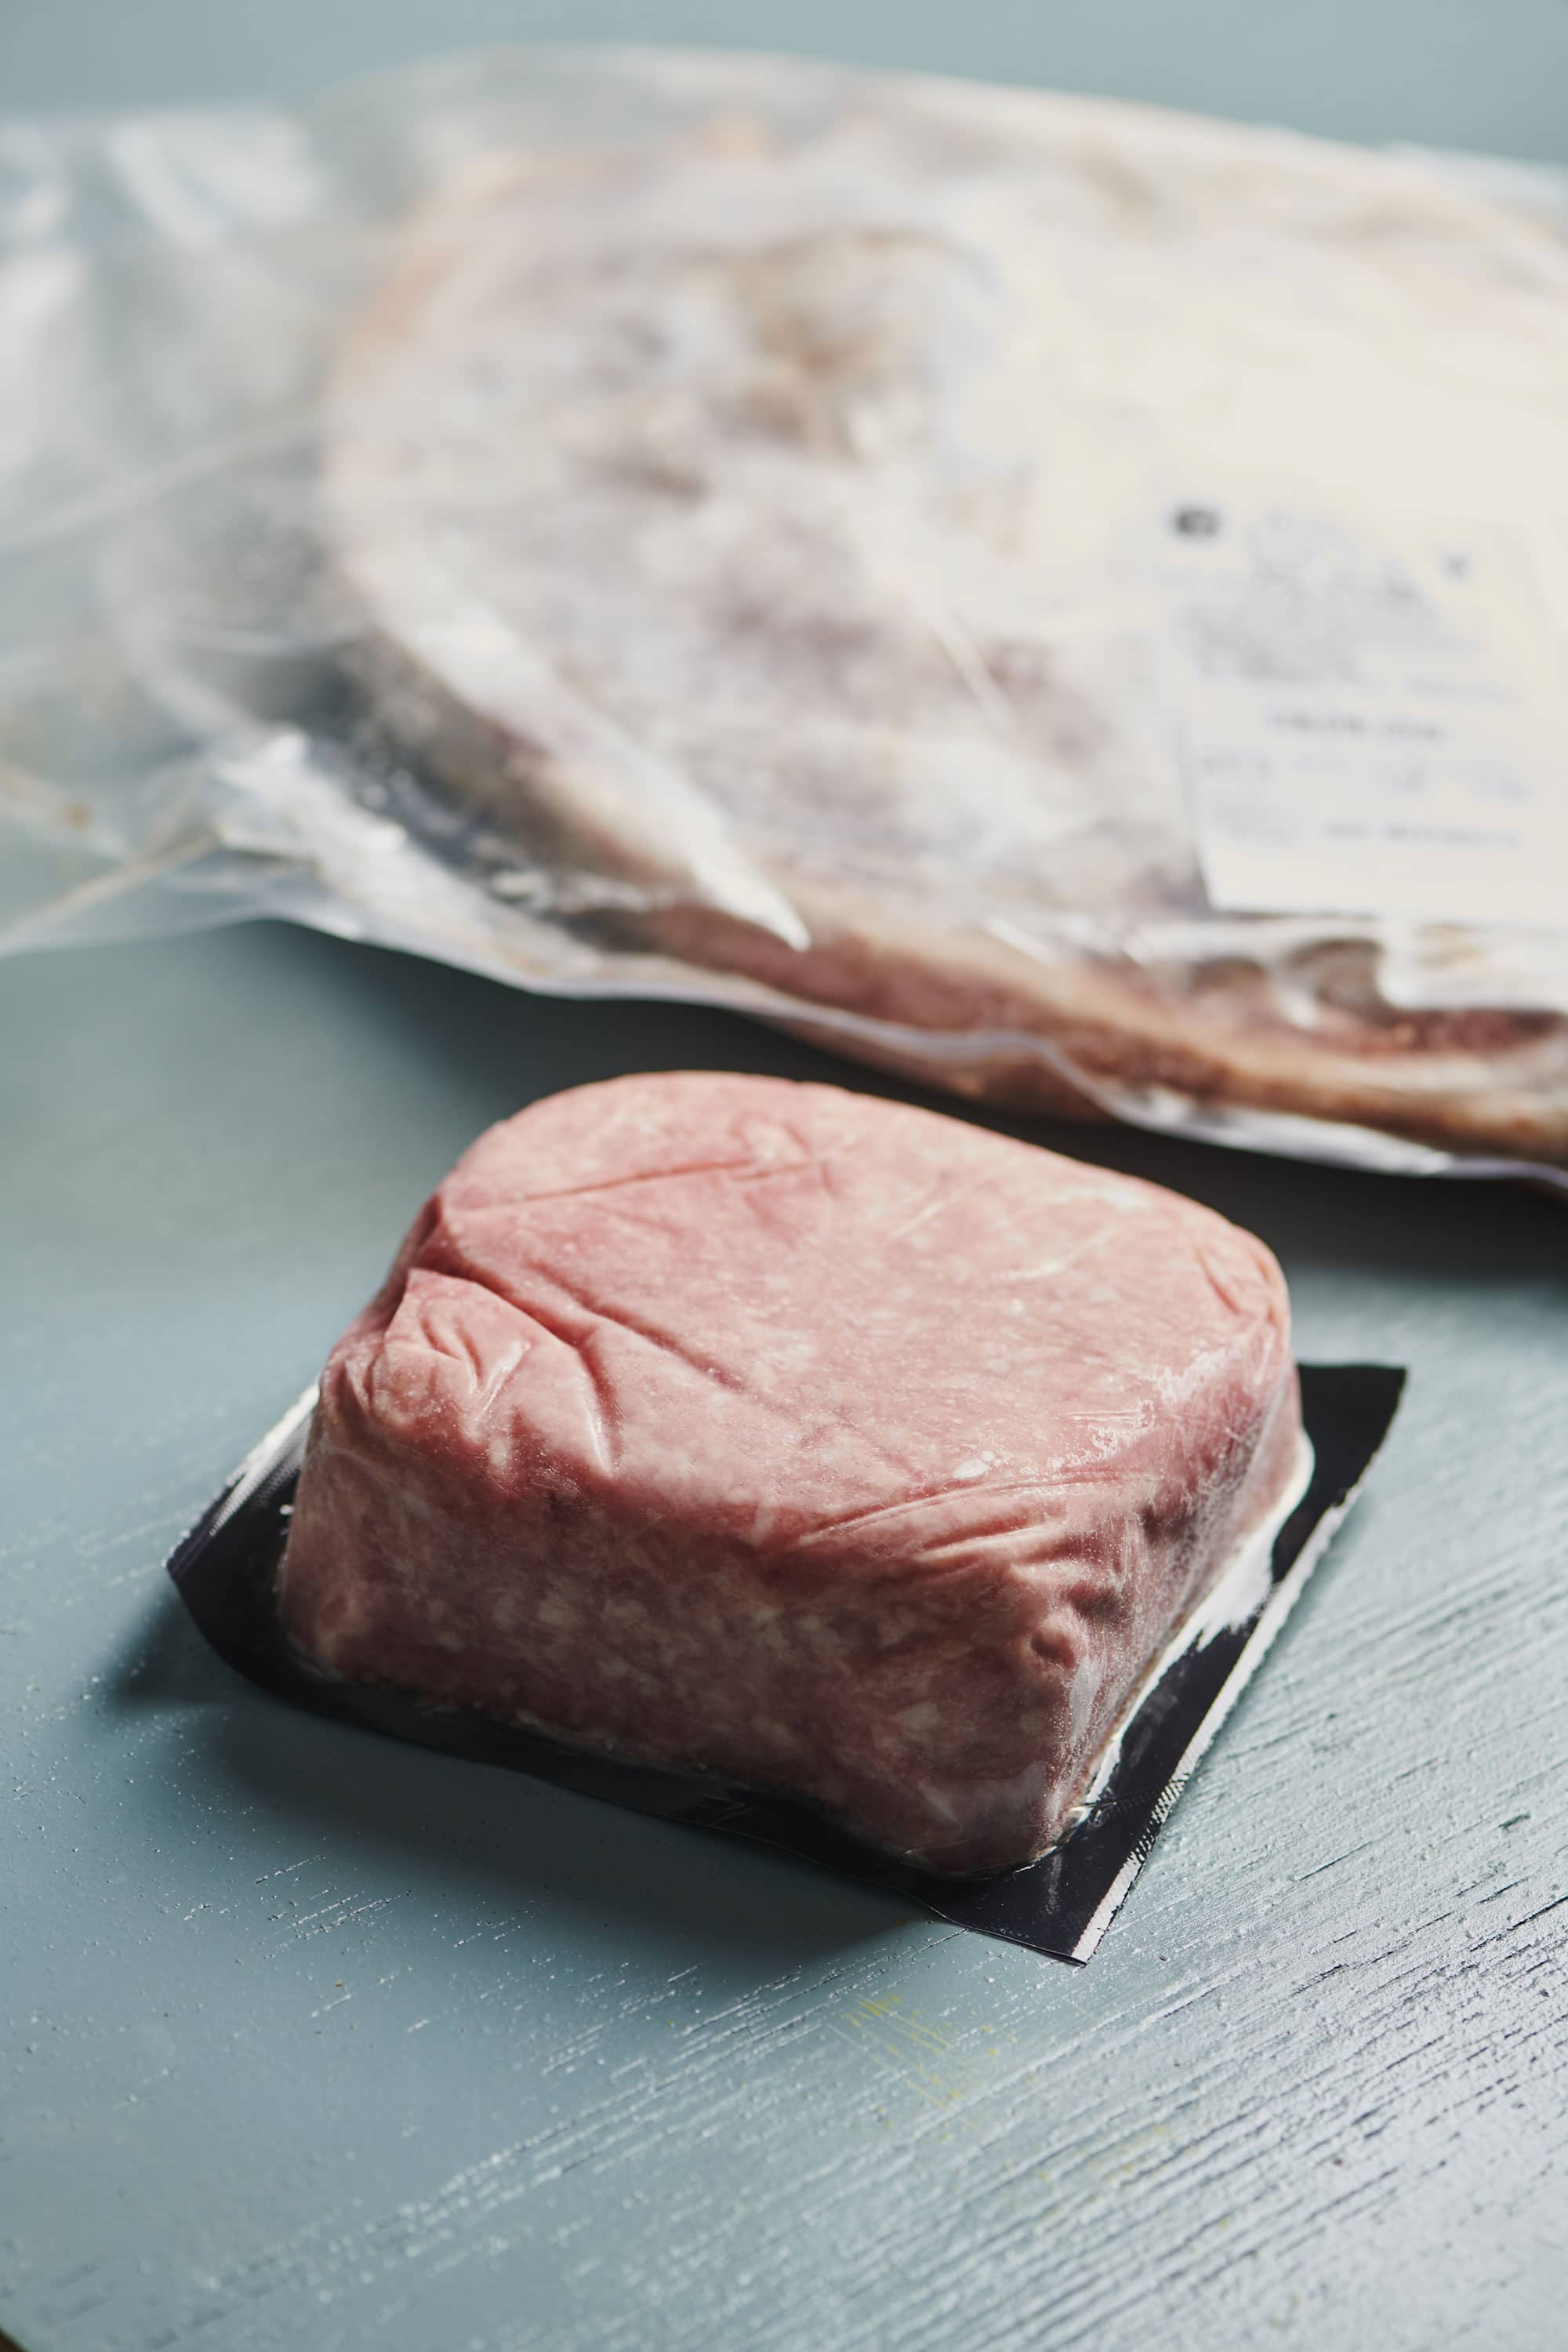 Frozen ground meat in a package.